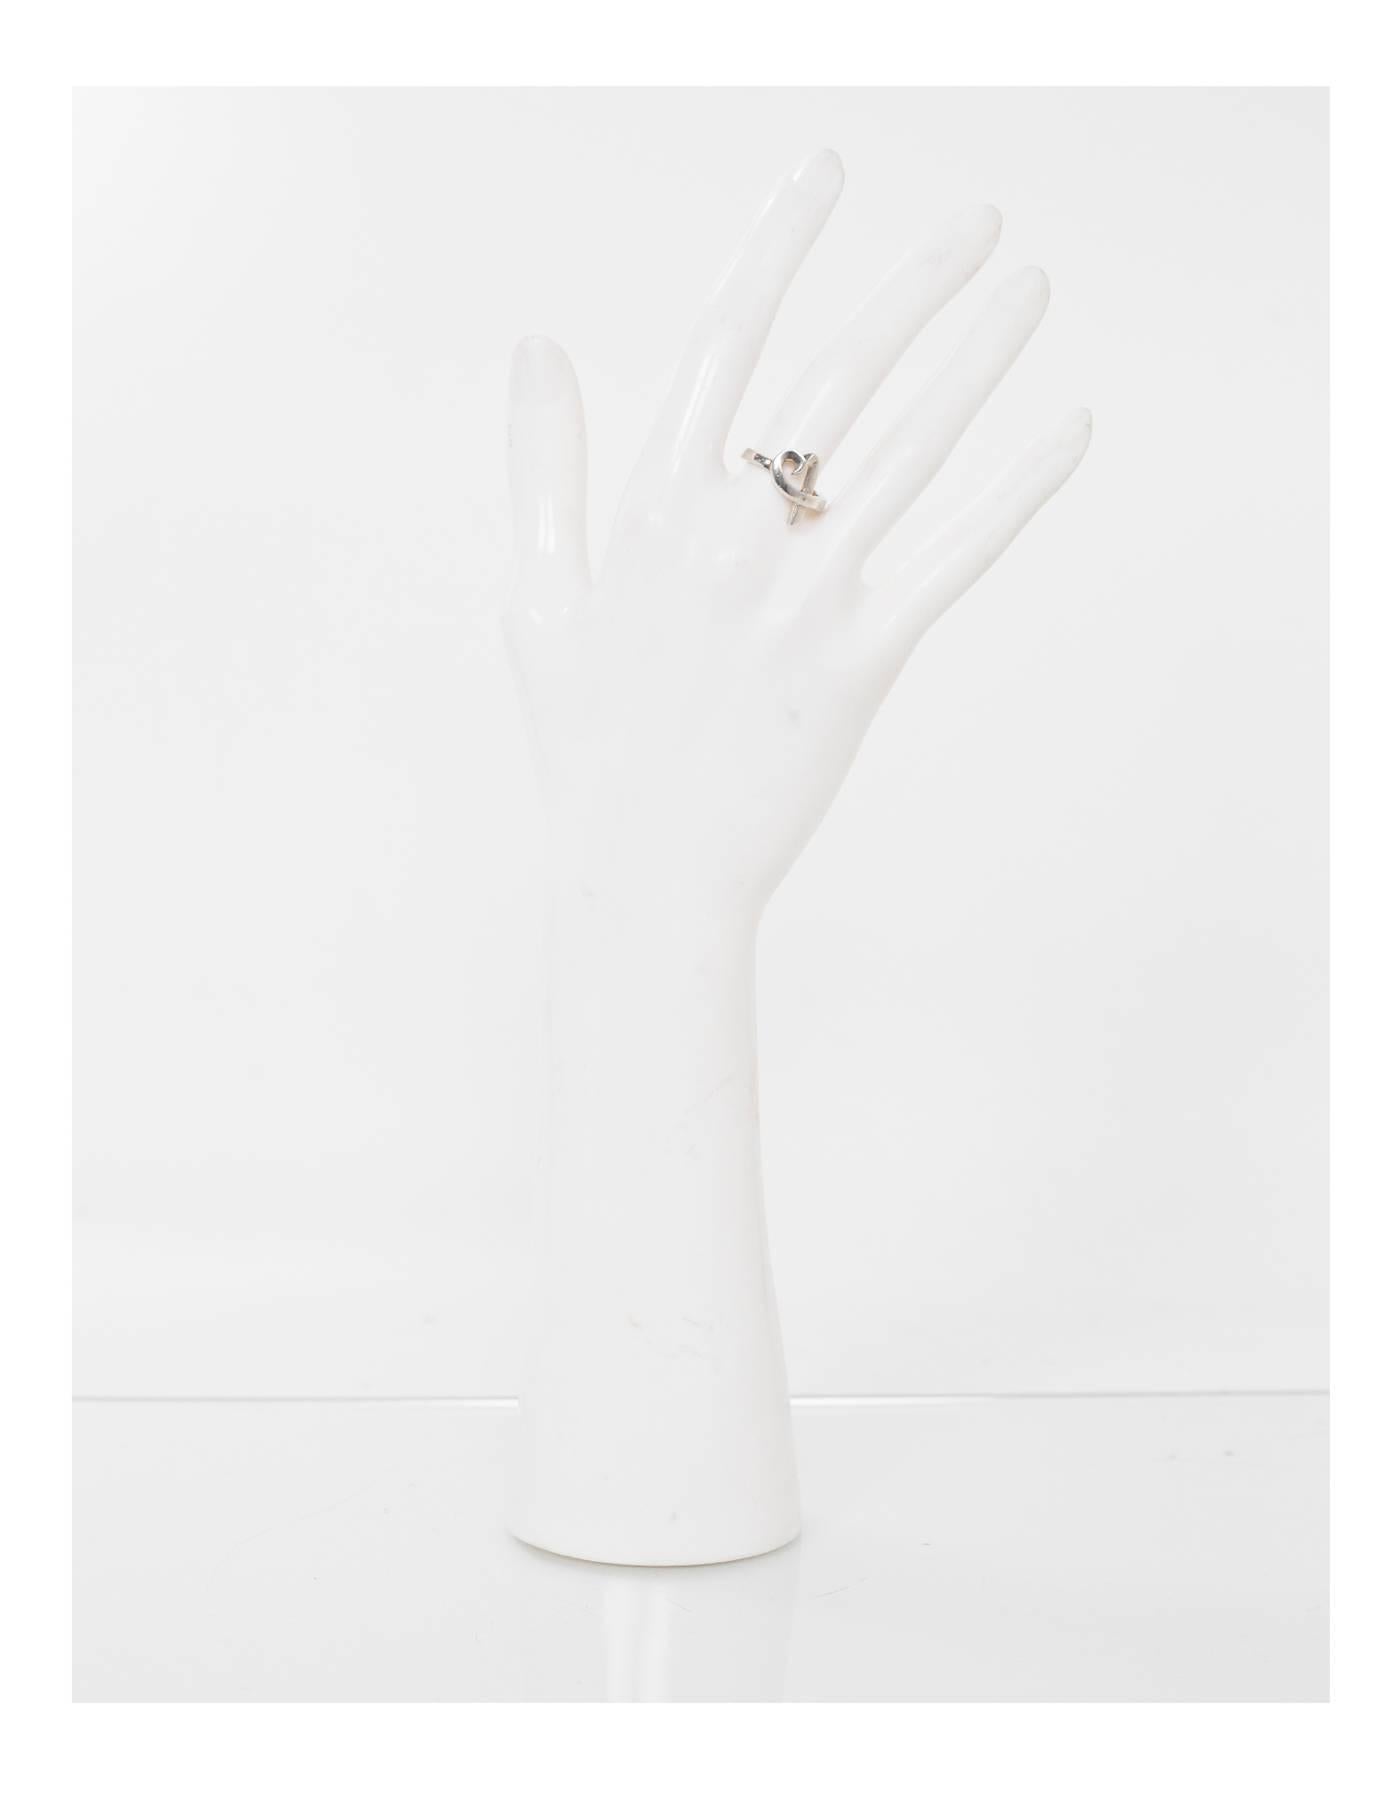 Tiffany & Co. Paloma Picasso Sterling Loving Heart Ring  Sz 5.5

Color: Silver
Materials: Sterling silver
Closure: None
Stamp: T & Co. 925
Overall Condition: Very good pre-owned condition with the exception of light surface marks and tarnish